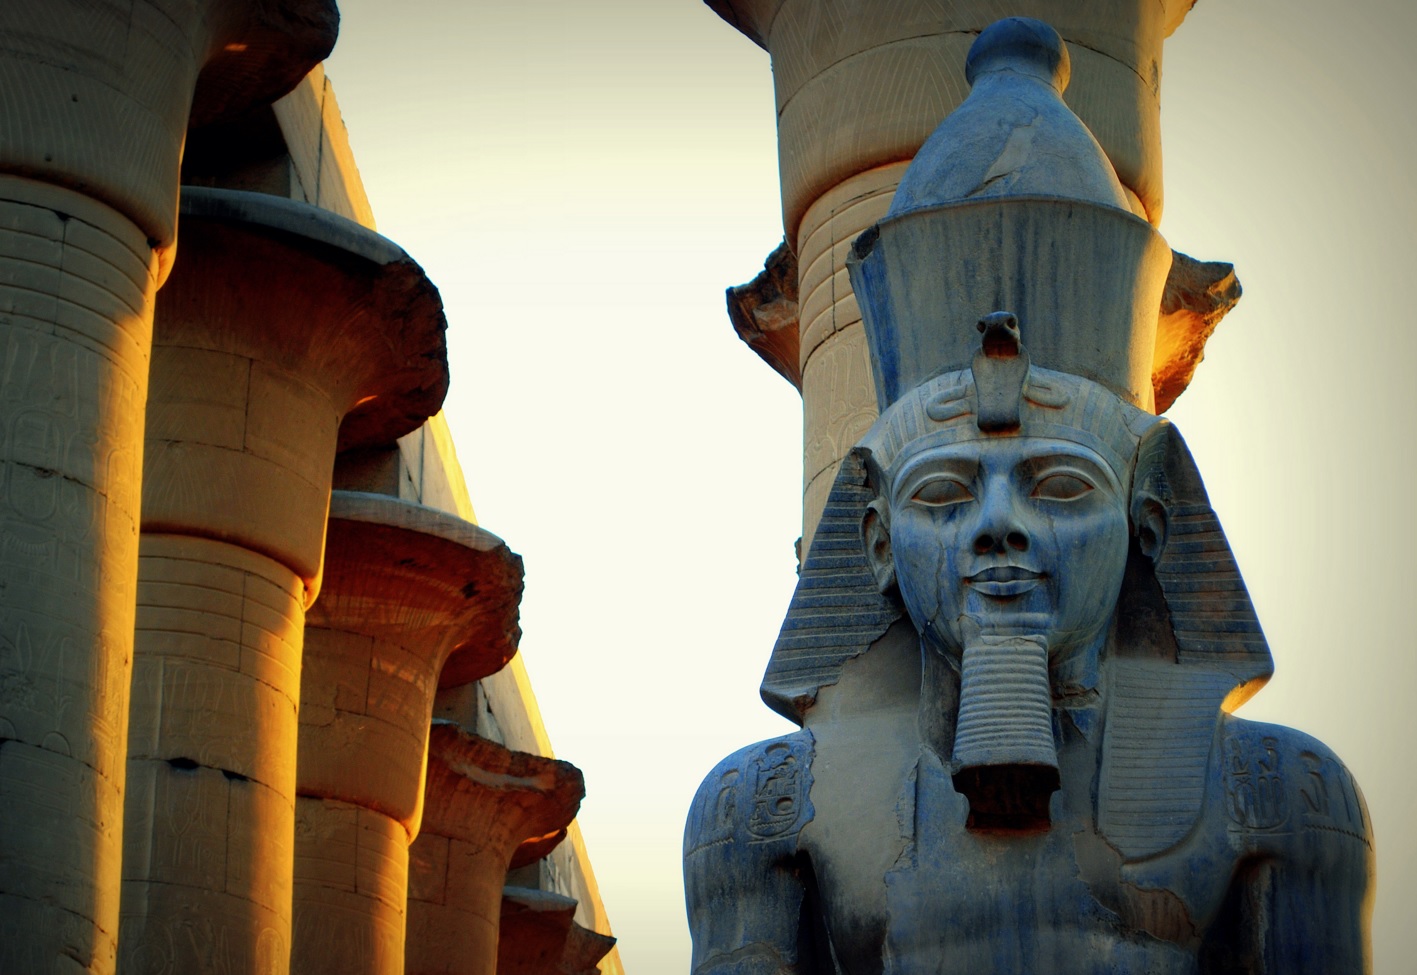 Cairo Tours & Package Trips | Cairo & Luxor Tour - 5 Days